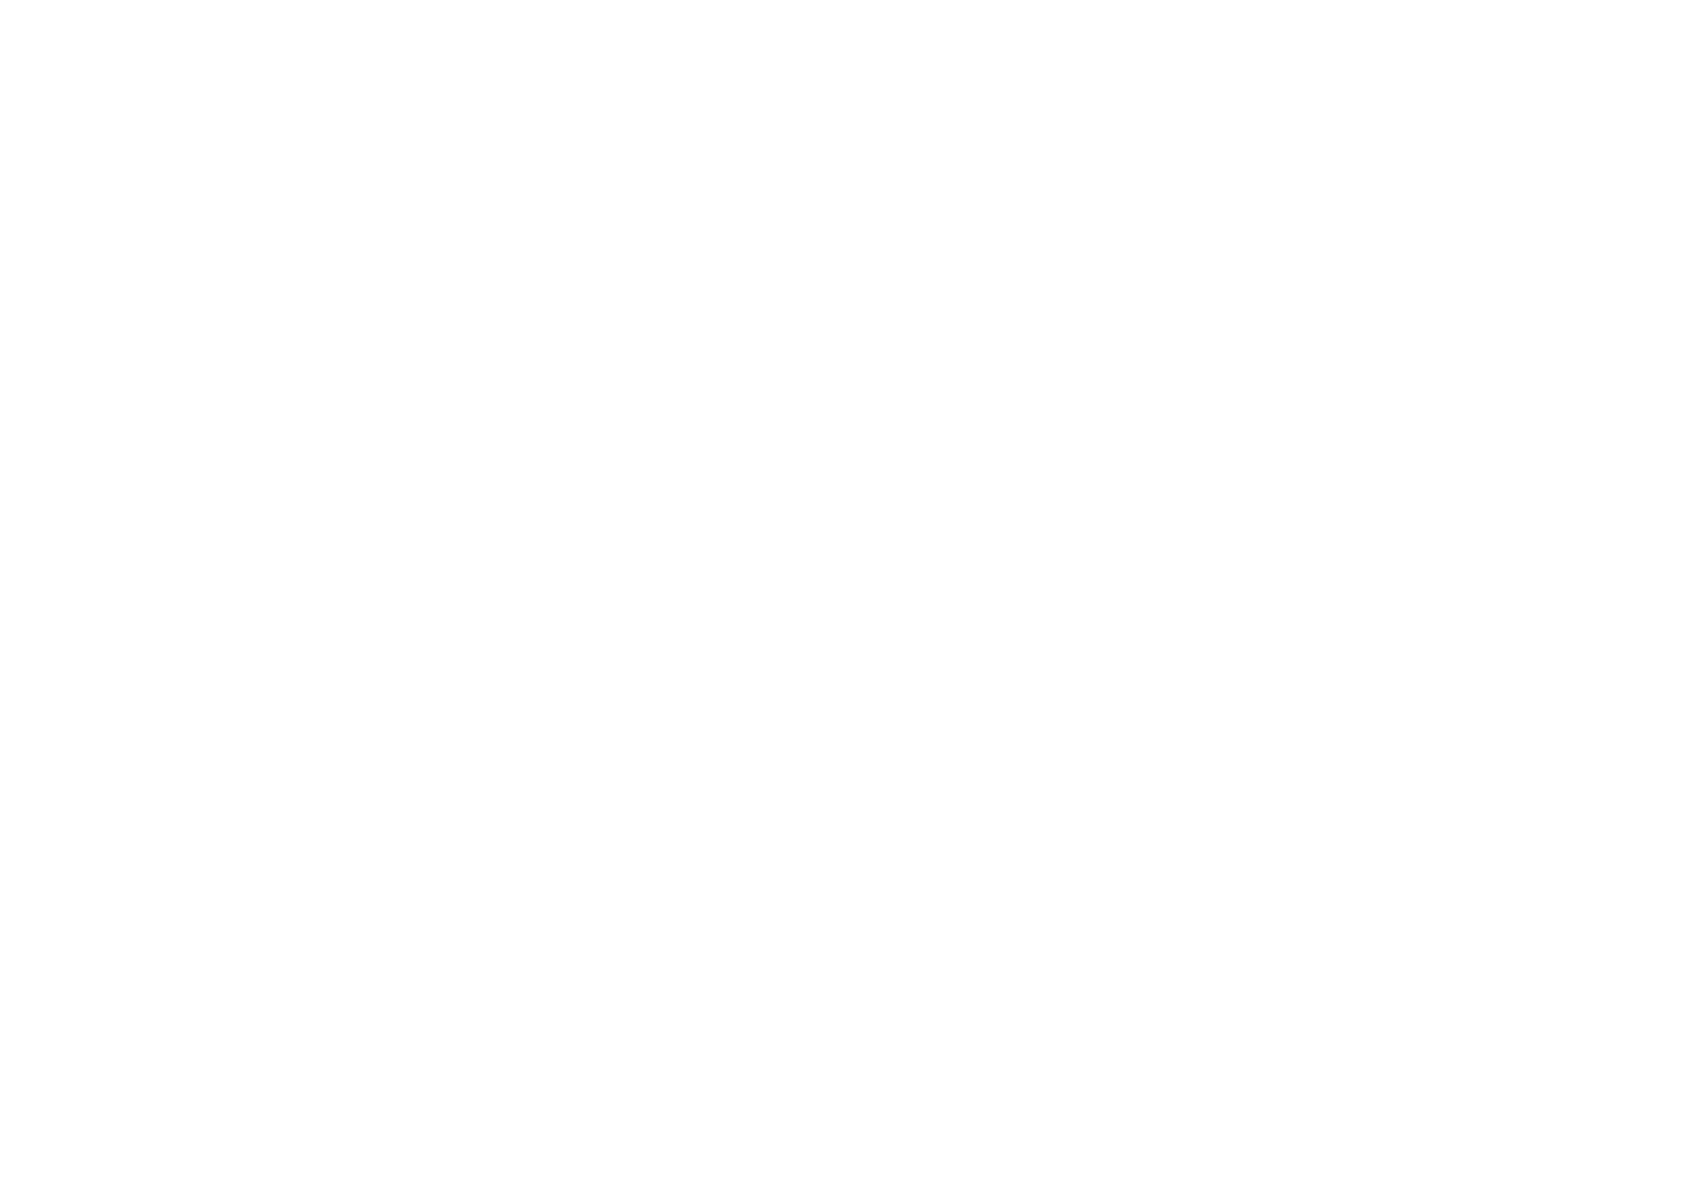 The Slow Show